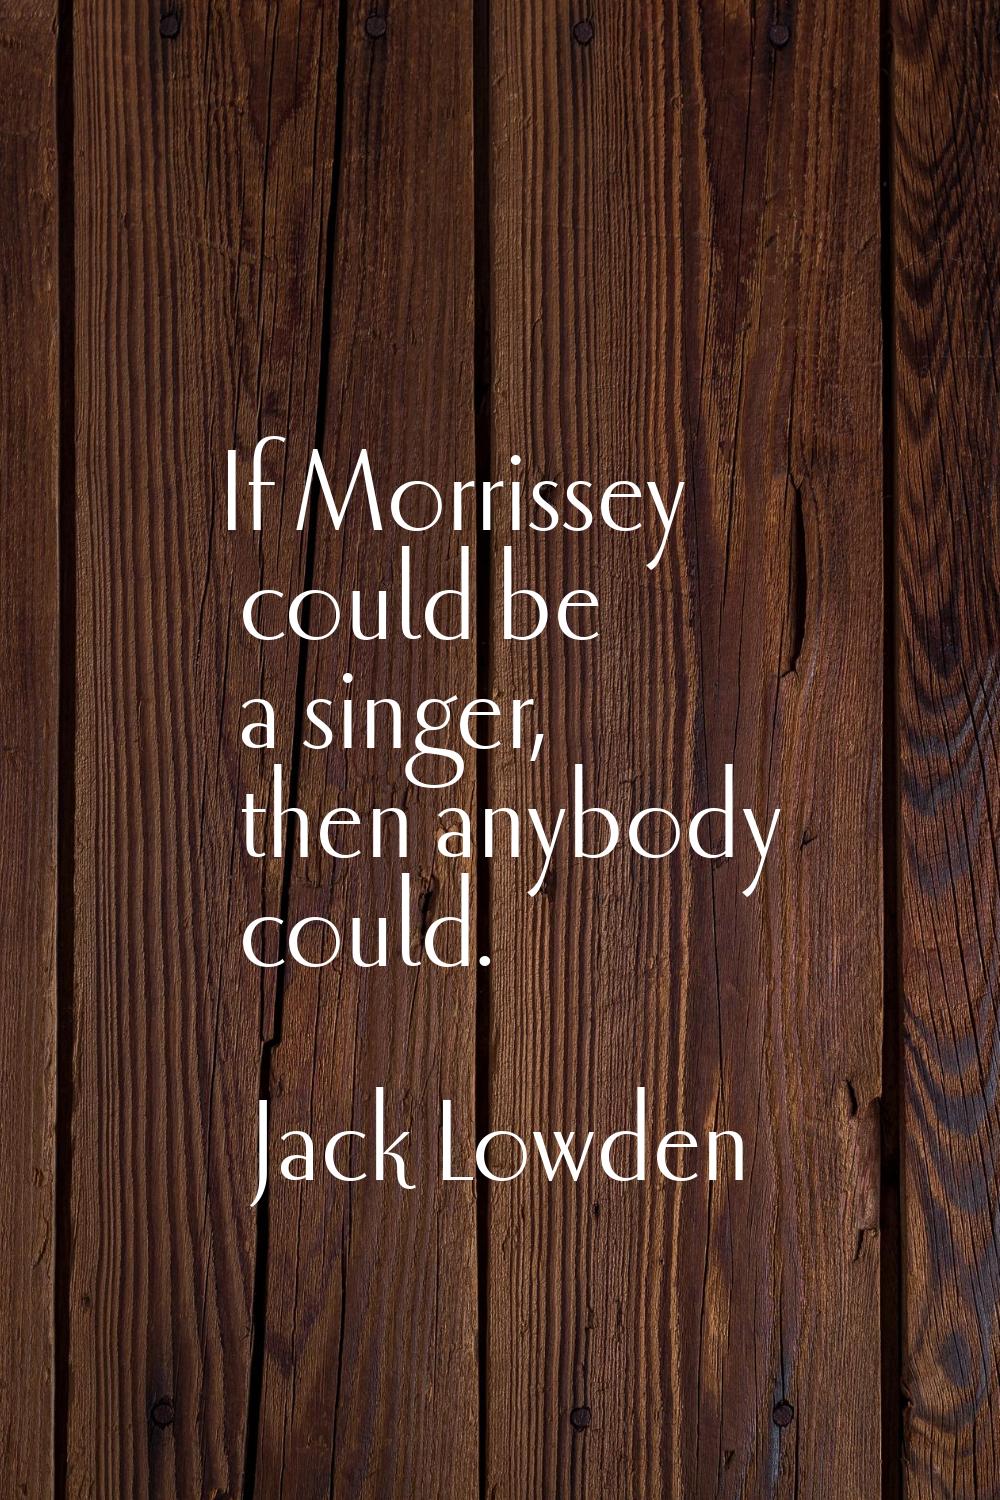 If Morrissey could be a singer, then anybody could.